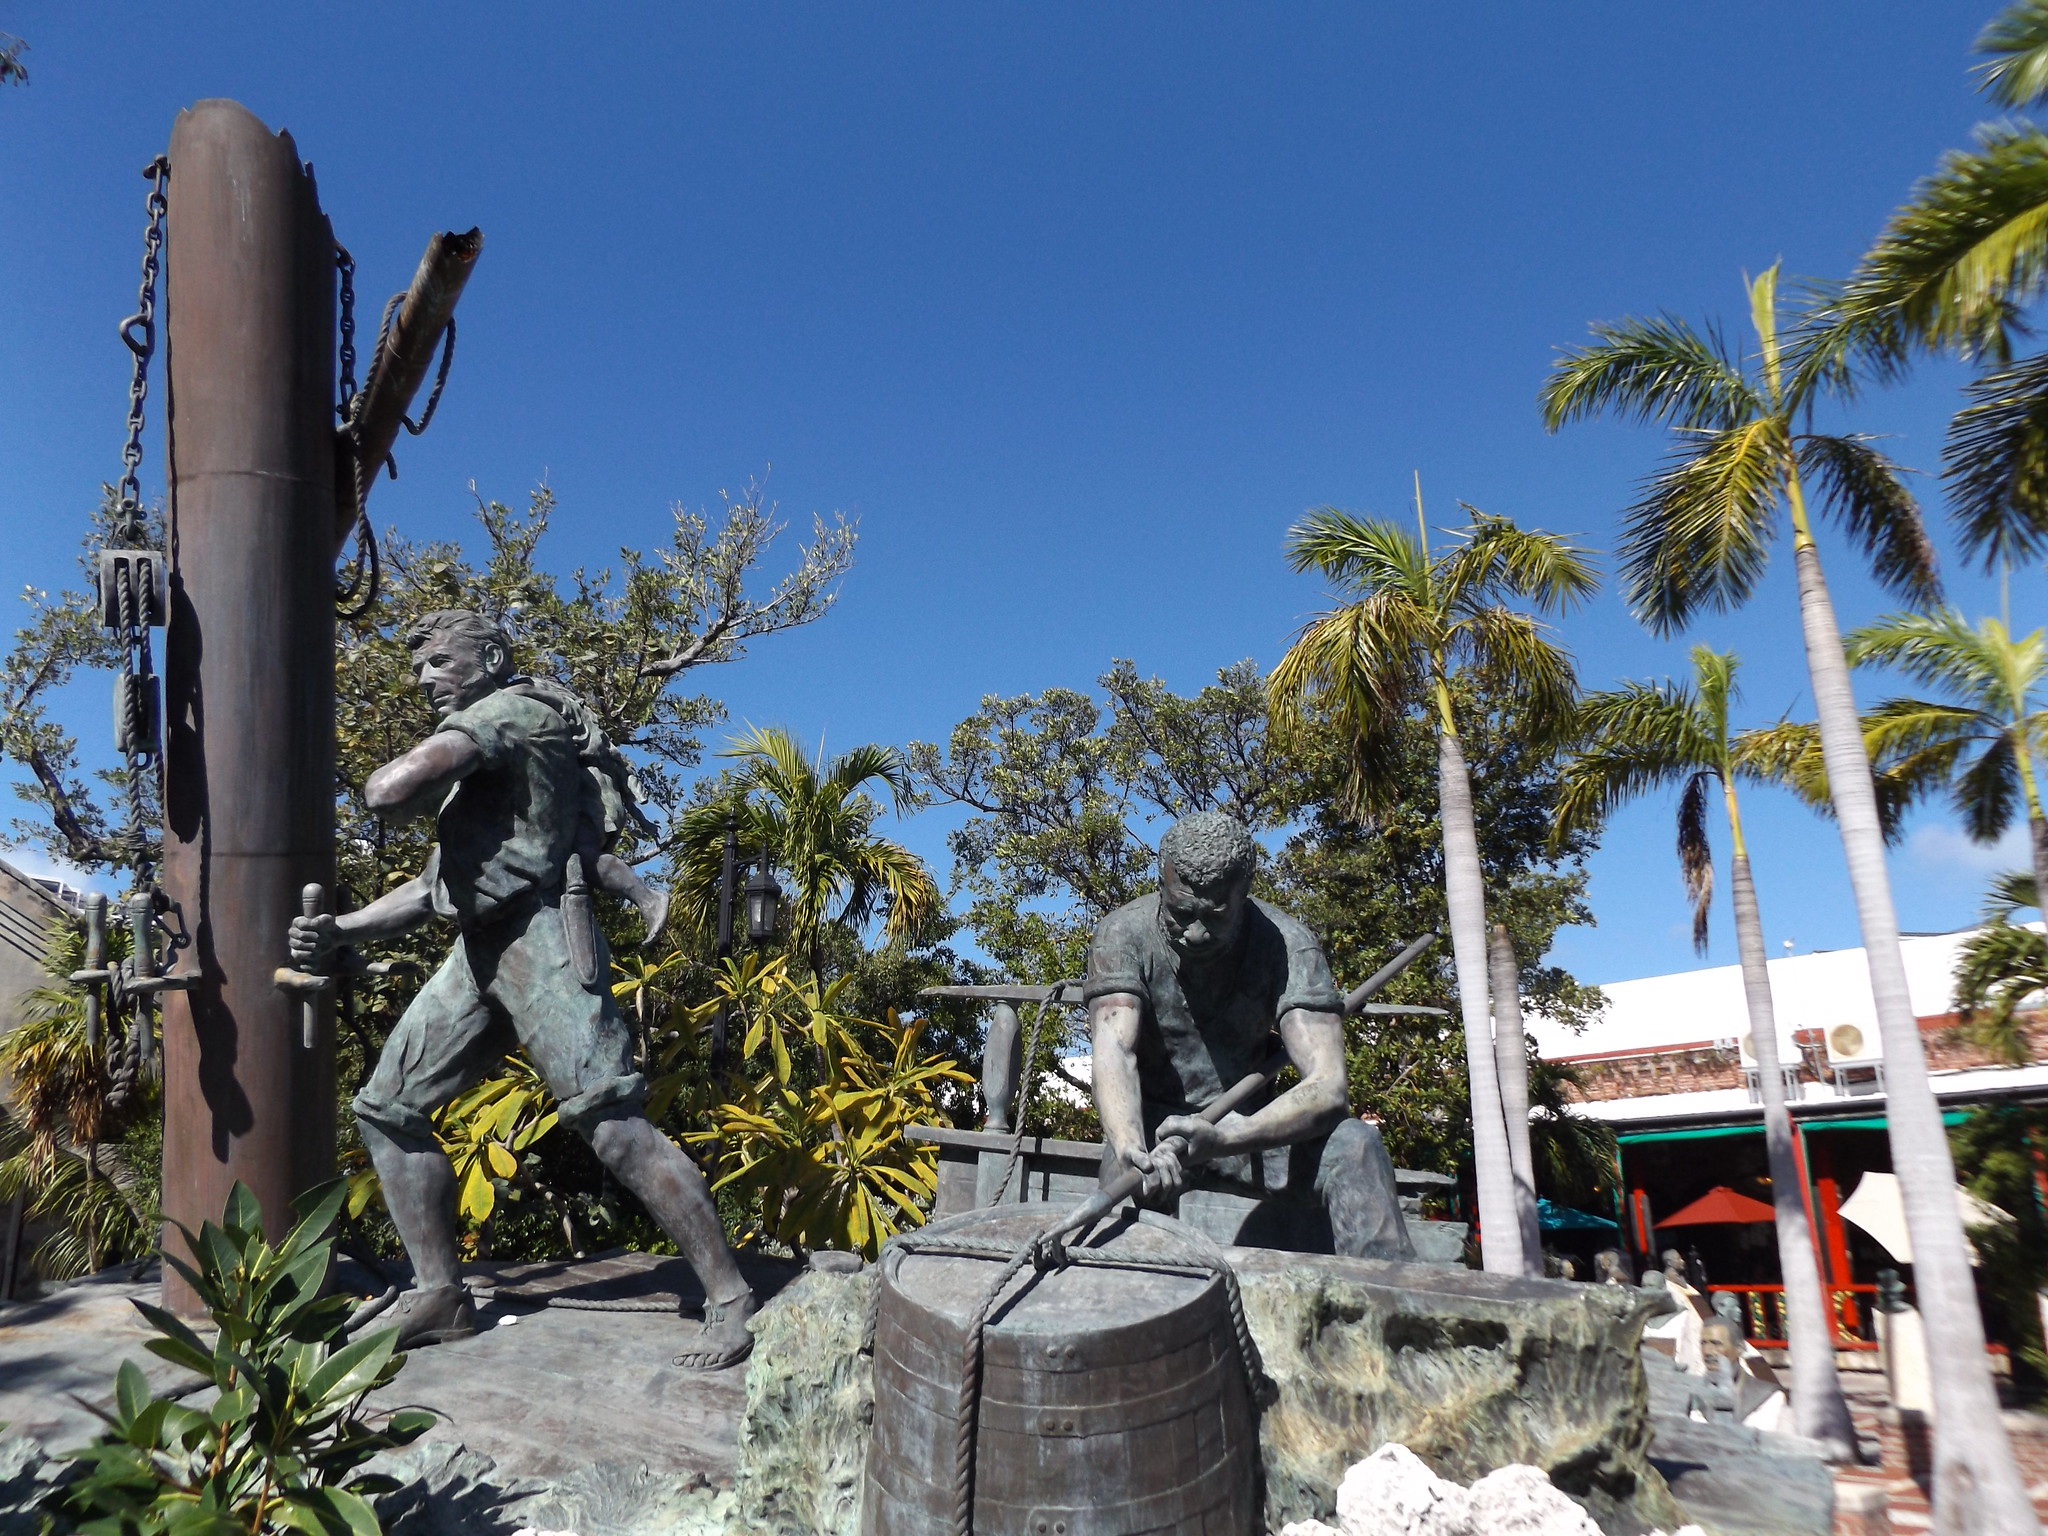 The Wreckers Sculpture, Key West, Florida, United States, 28 December 2019